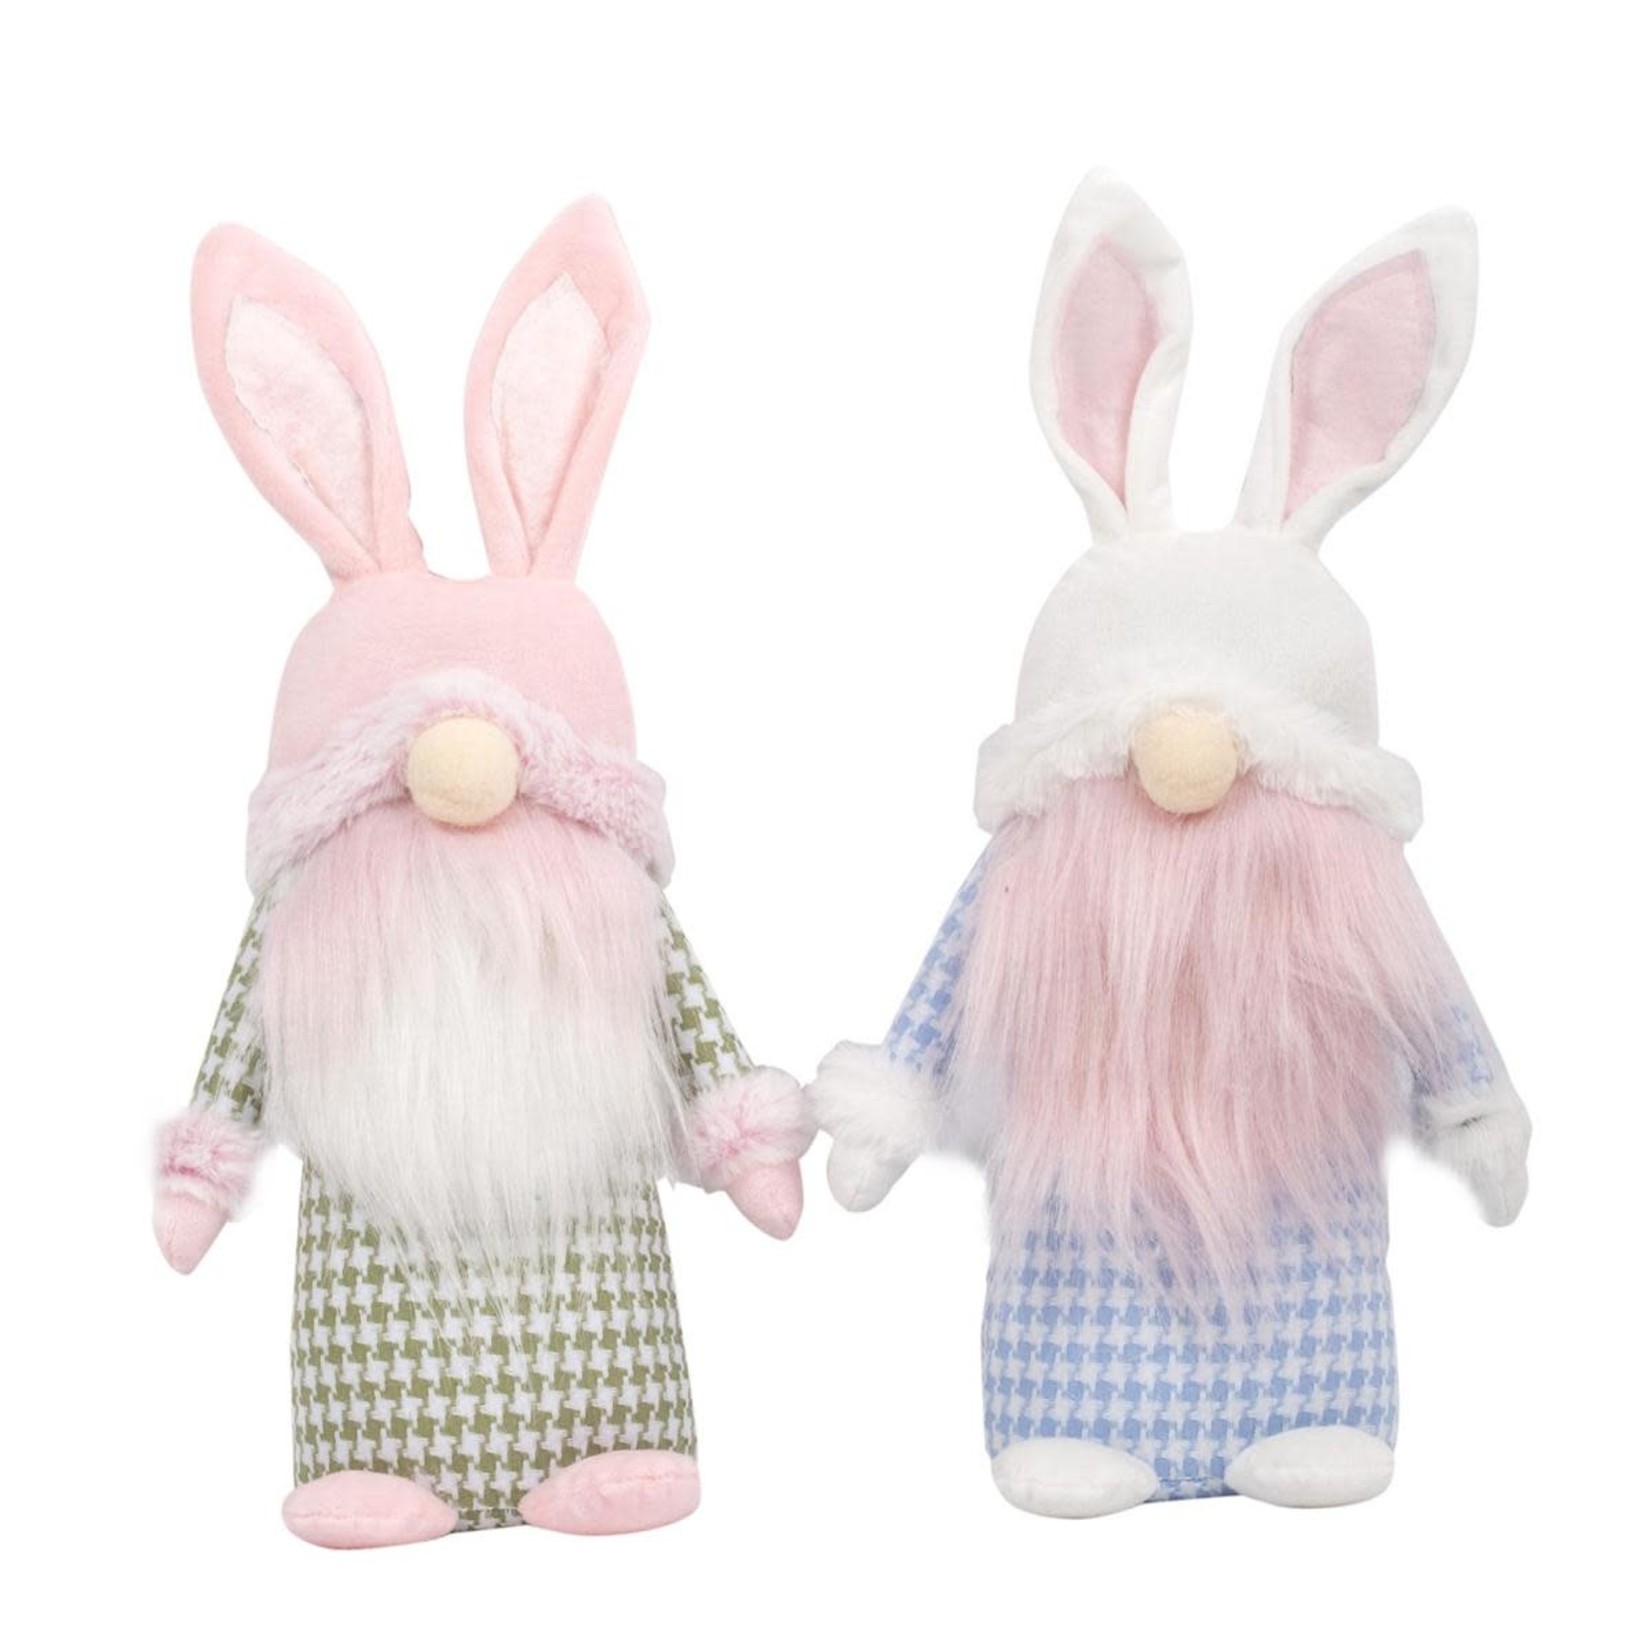 EASTER SITTING BUNNY GNOME - 14"